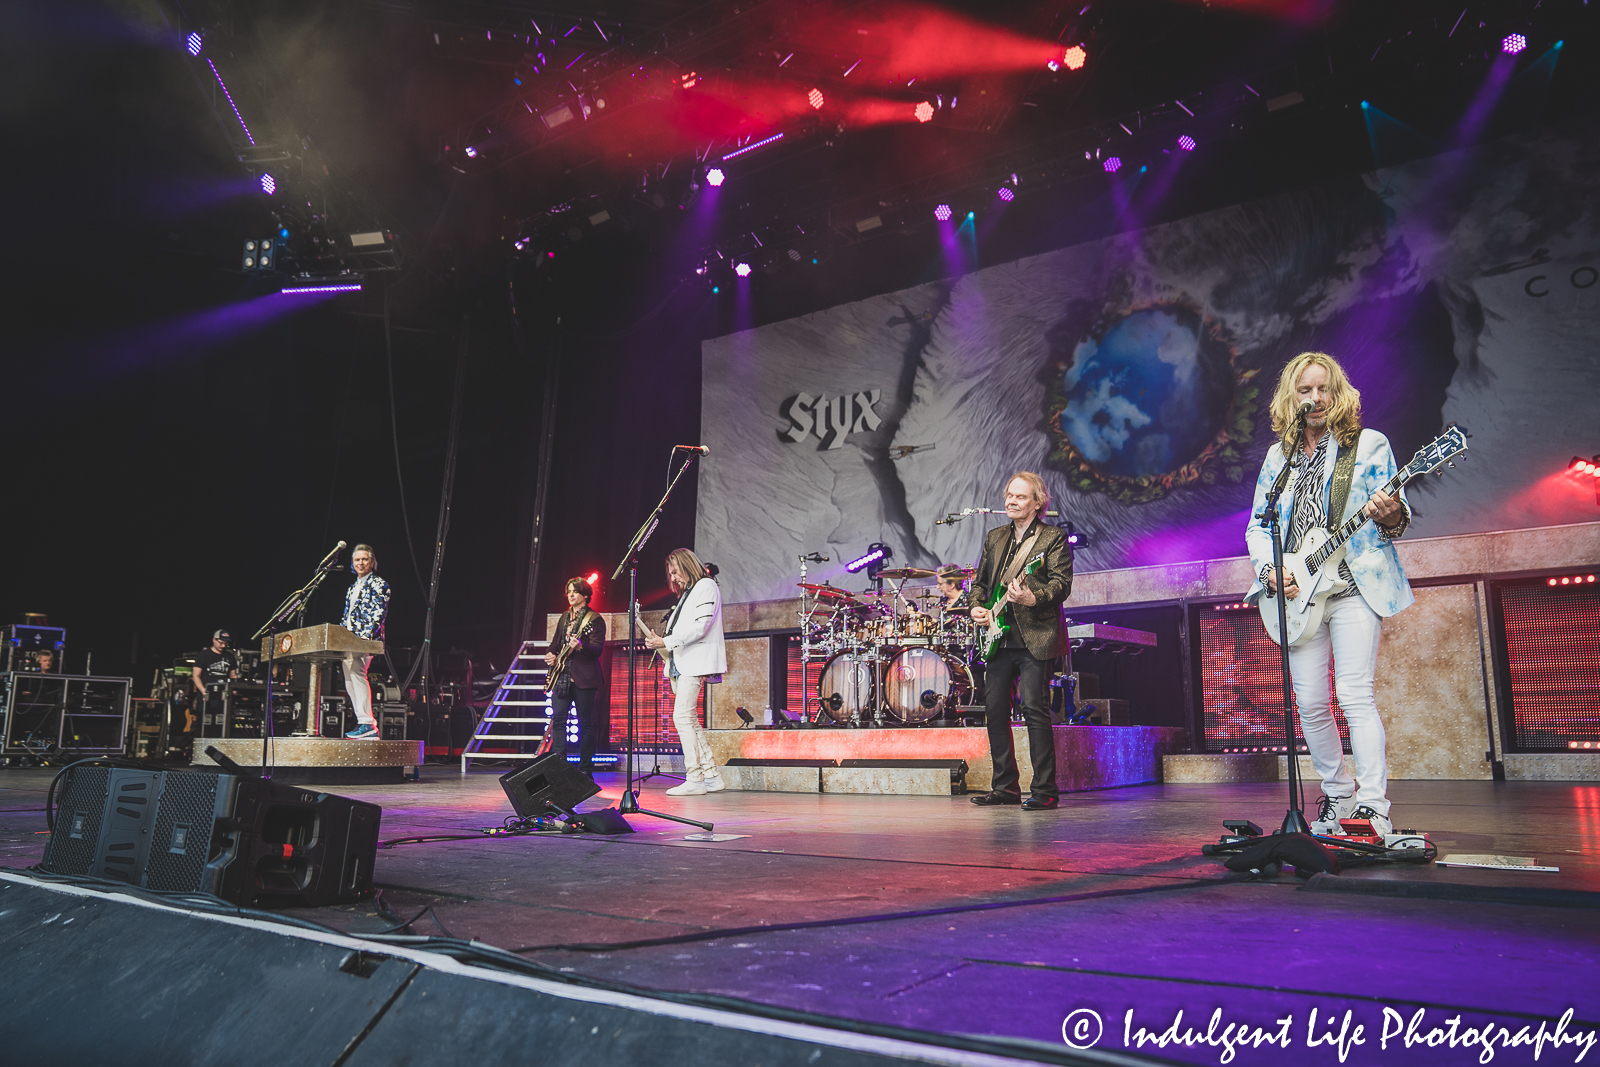 Progressive rock band Styx in concert on the "Live & UnZoomed" tour at Starlight Theatre in Kansas City, MO on June 14, 2022.